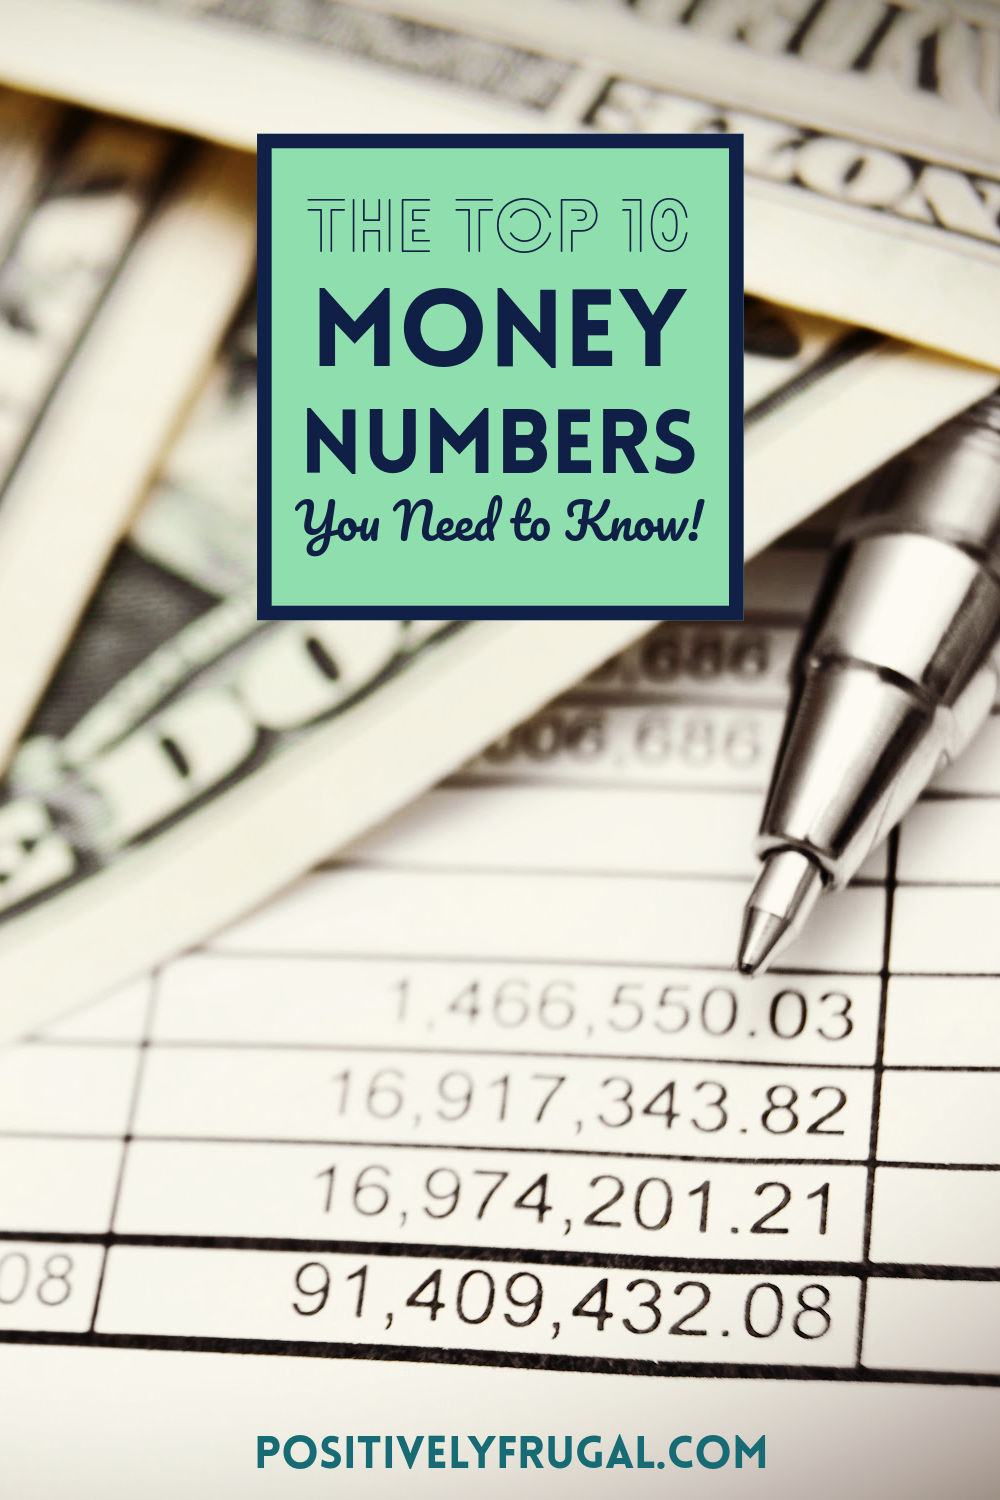 The Top 10 Money Numbers You Need to Know by PositivelyFrugal.com